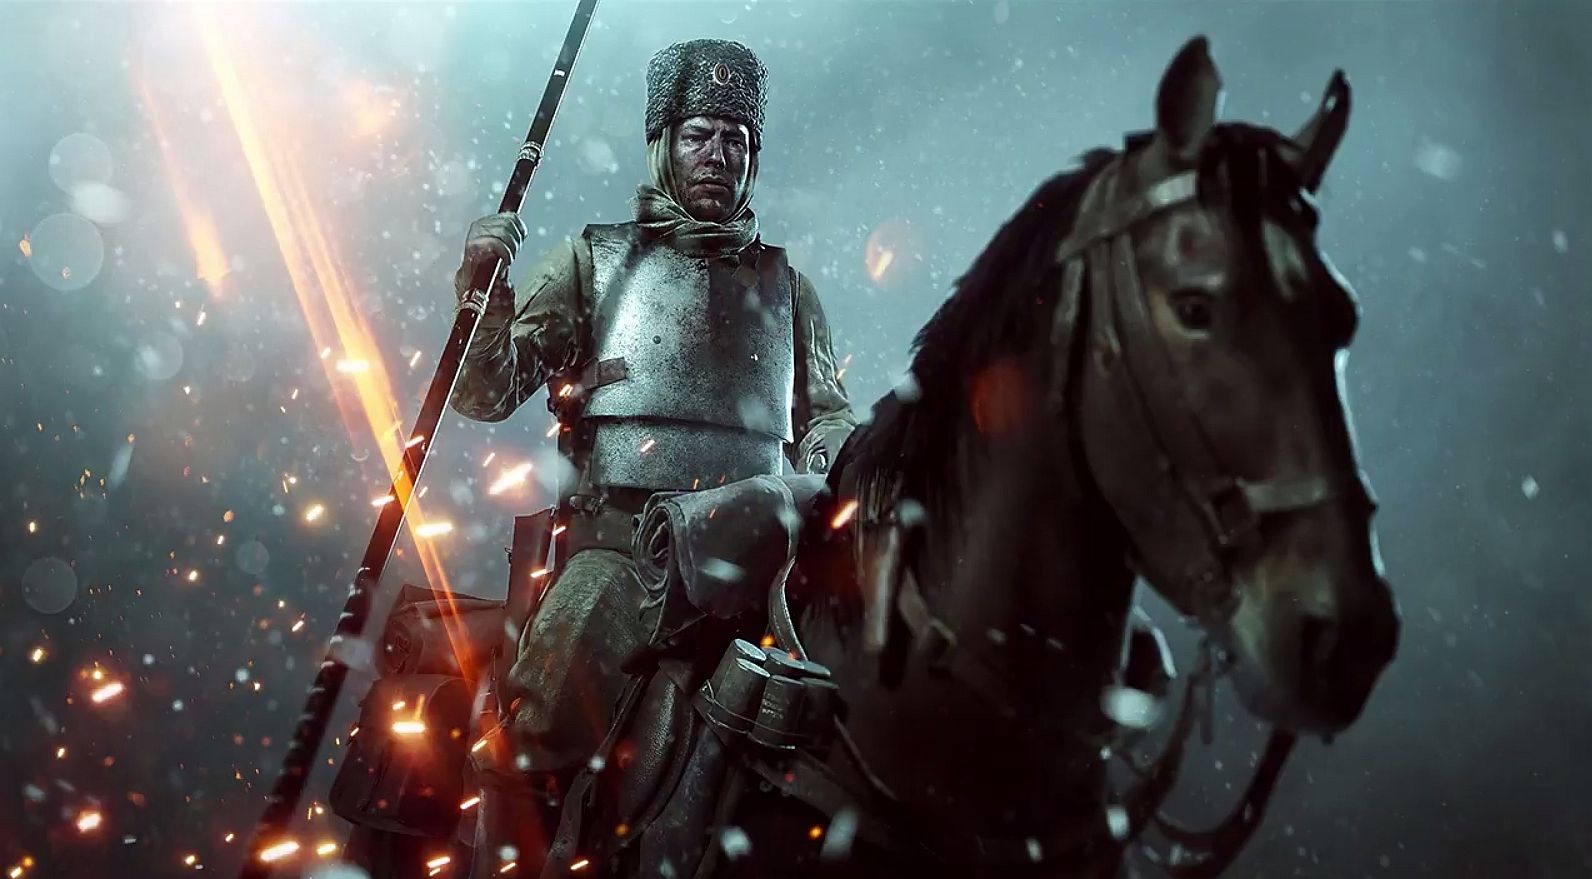 Image for Battlefield 1 is free to play this weekend on Xbox One, In the Name of the Tsar and They Shall Not Pass free trial starts today